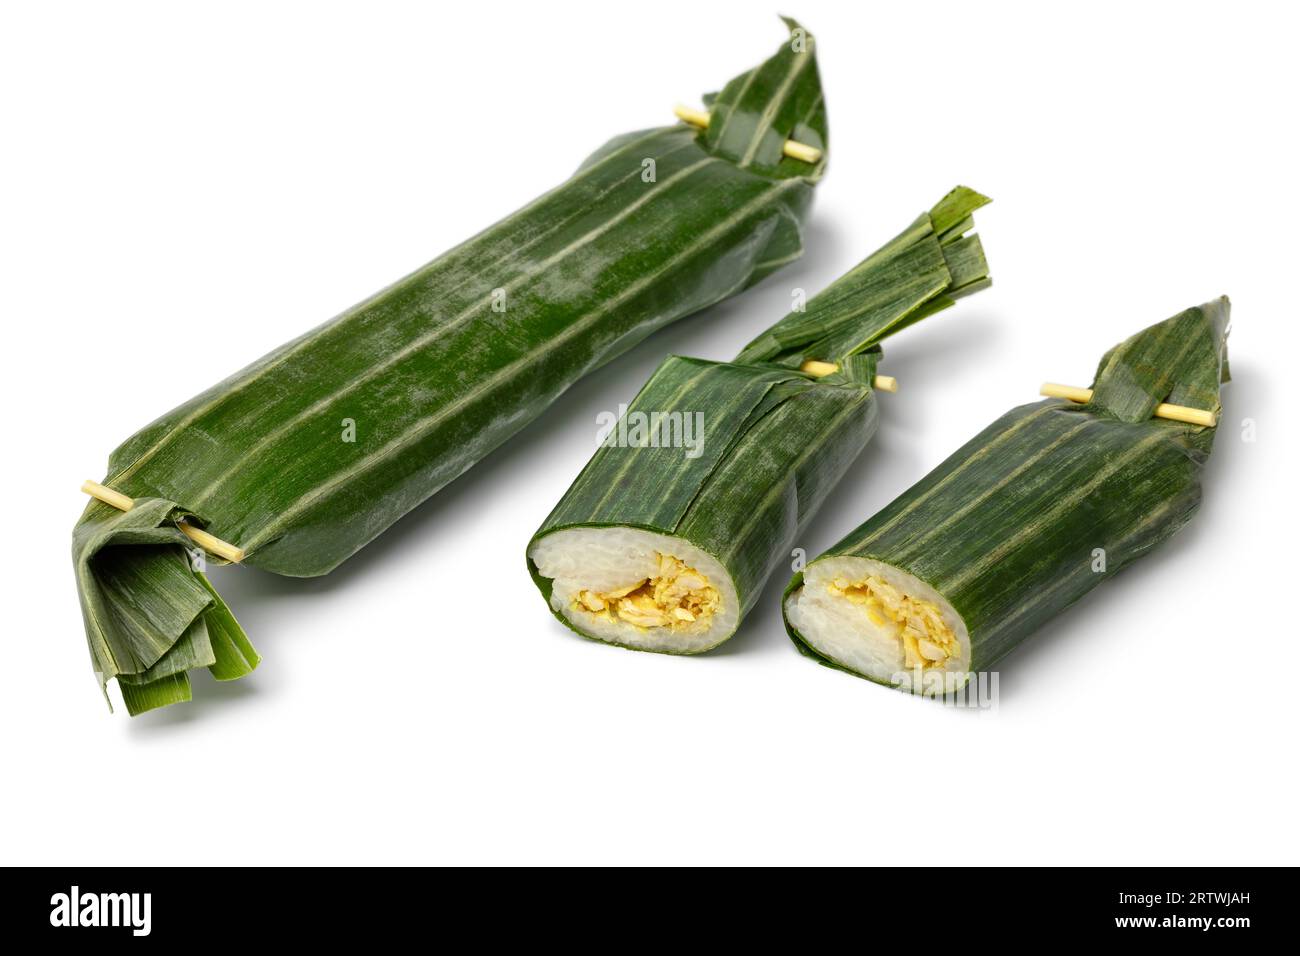 Whole and halved Lemper Ayam wrapped in banana leaves, an Indonesian savoury snack made of glutinous rice filled with seasoned shredded chicken close Stock Photo